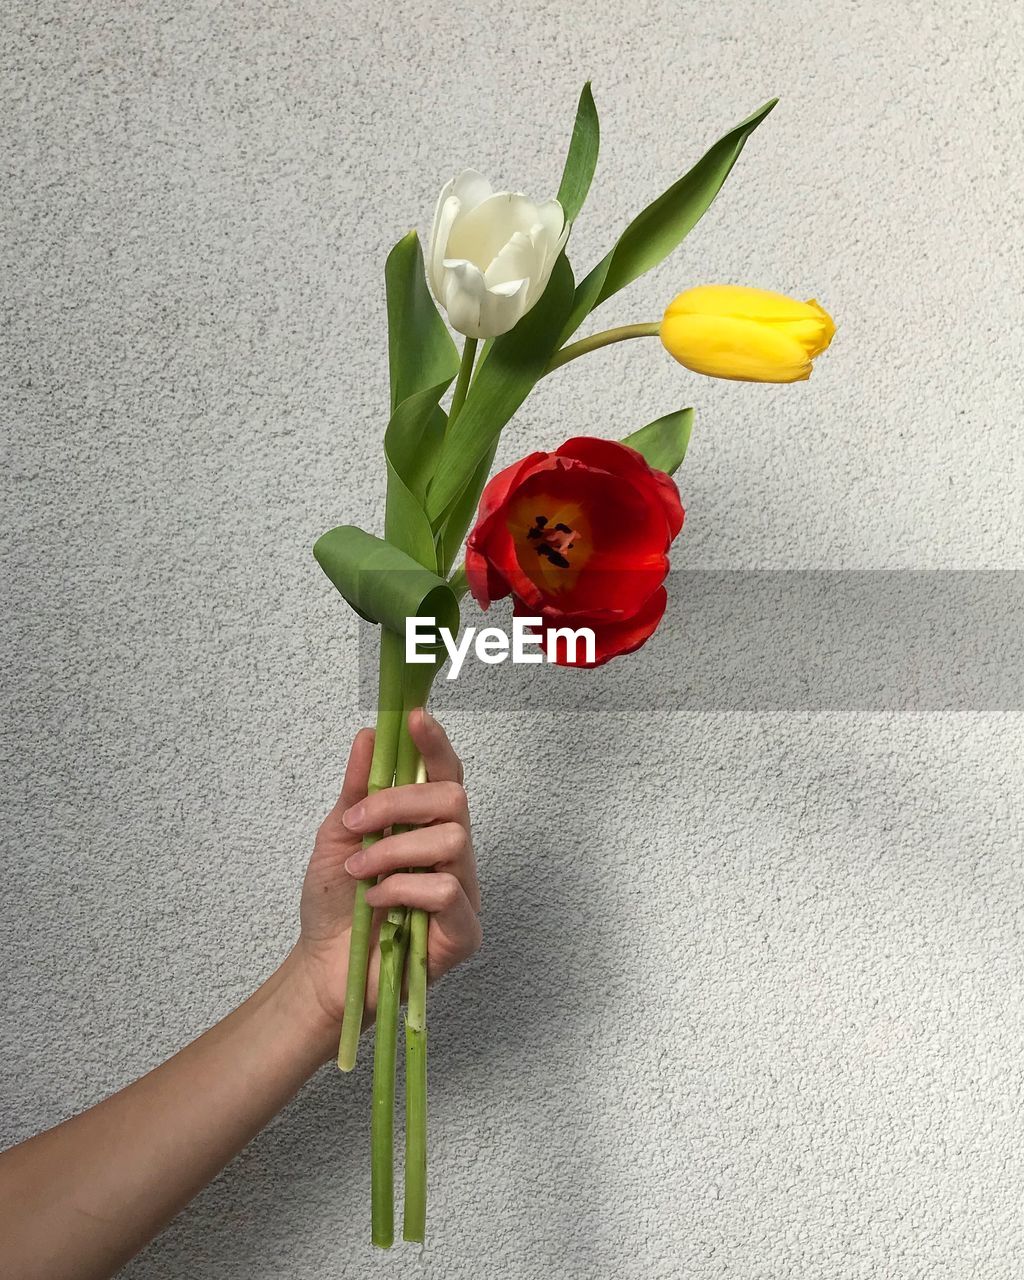 Cropped hand of person holding tulip flowers against wall